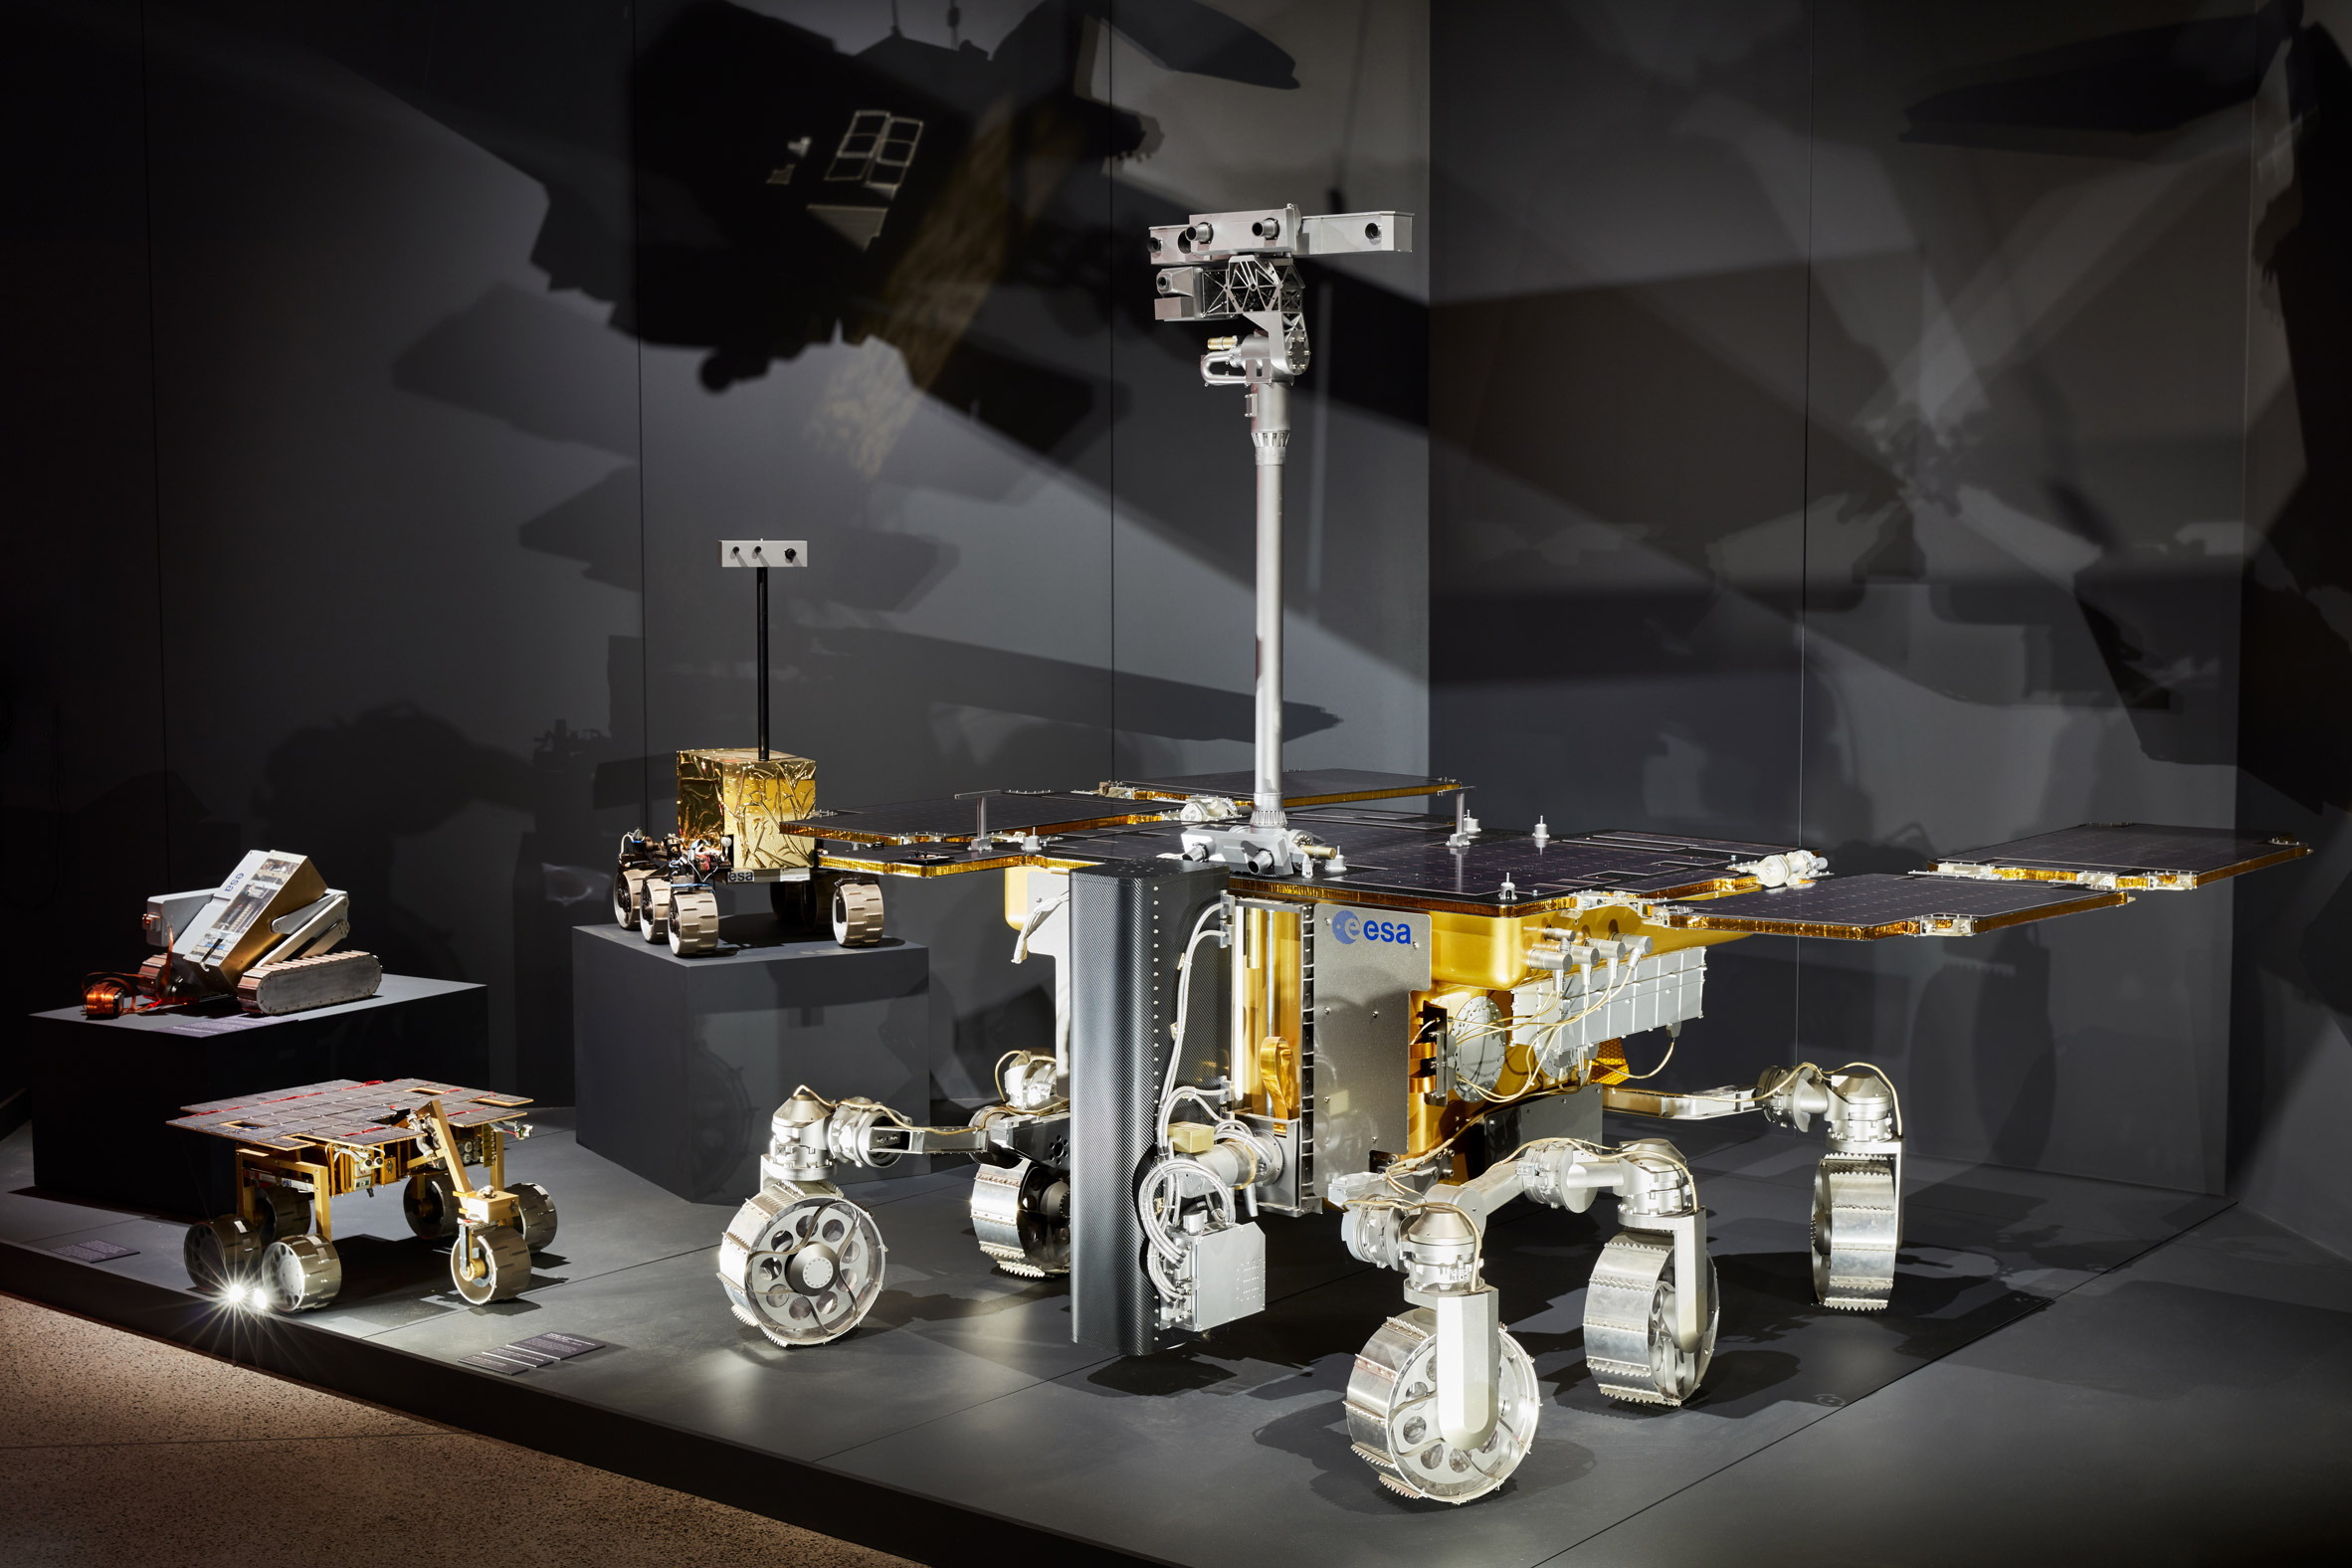 Moving to Mars exhibition opens at Design Museum in London